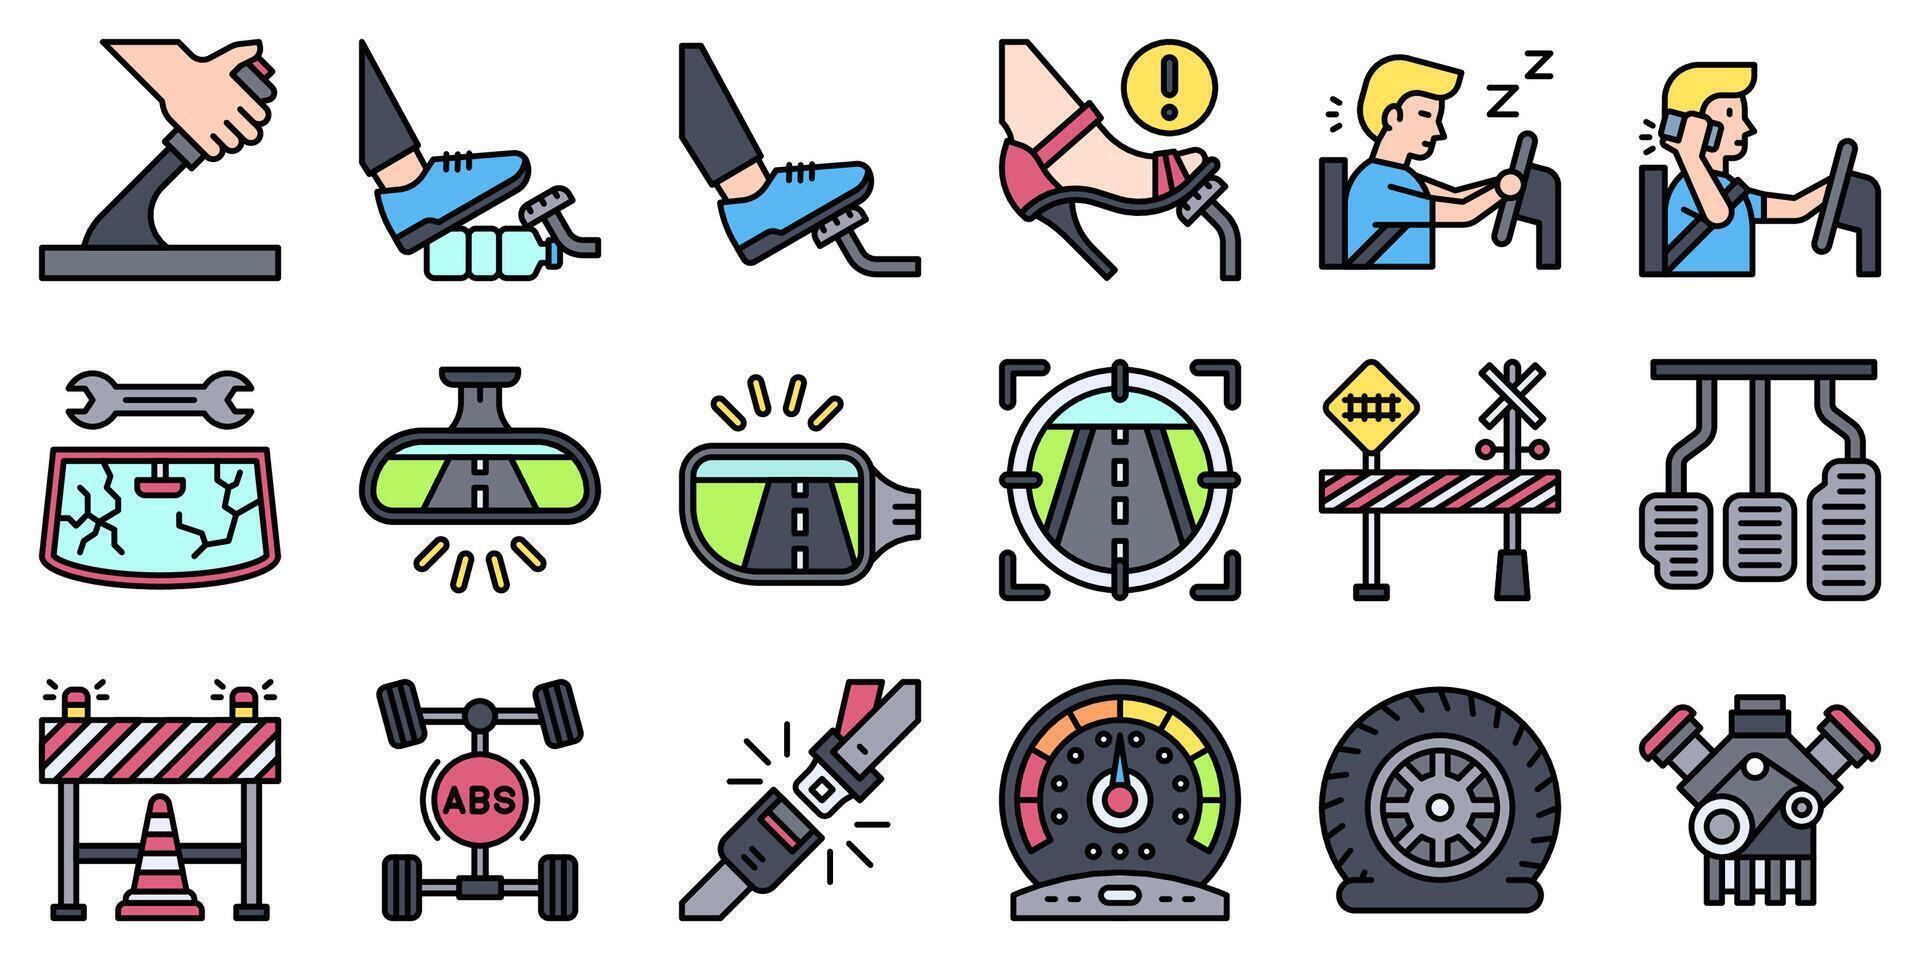 Car accident and safety related filled icon set 3 vector